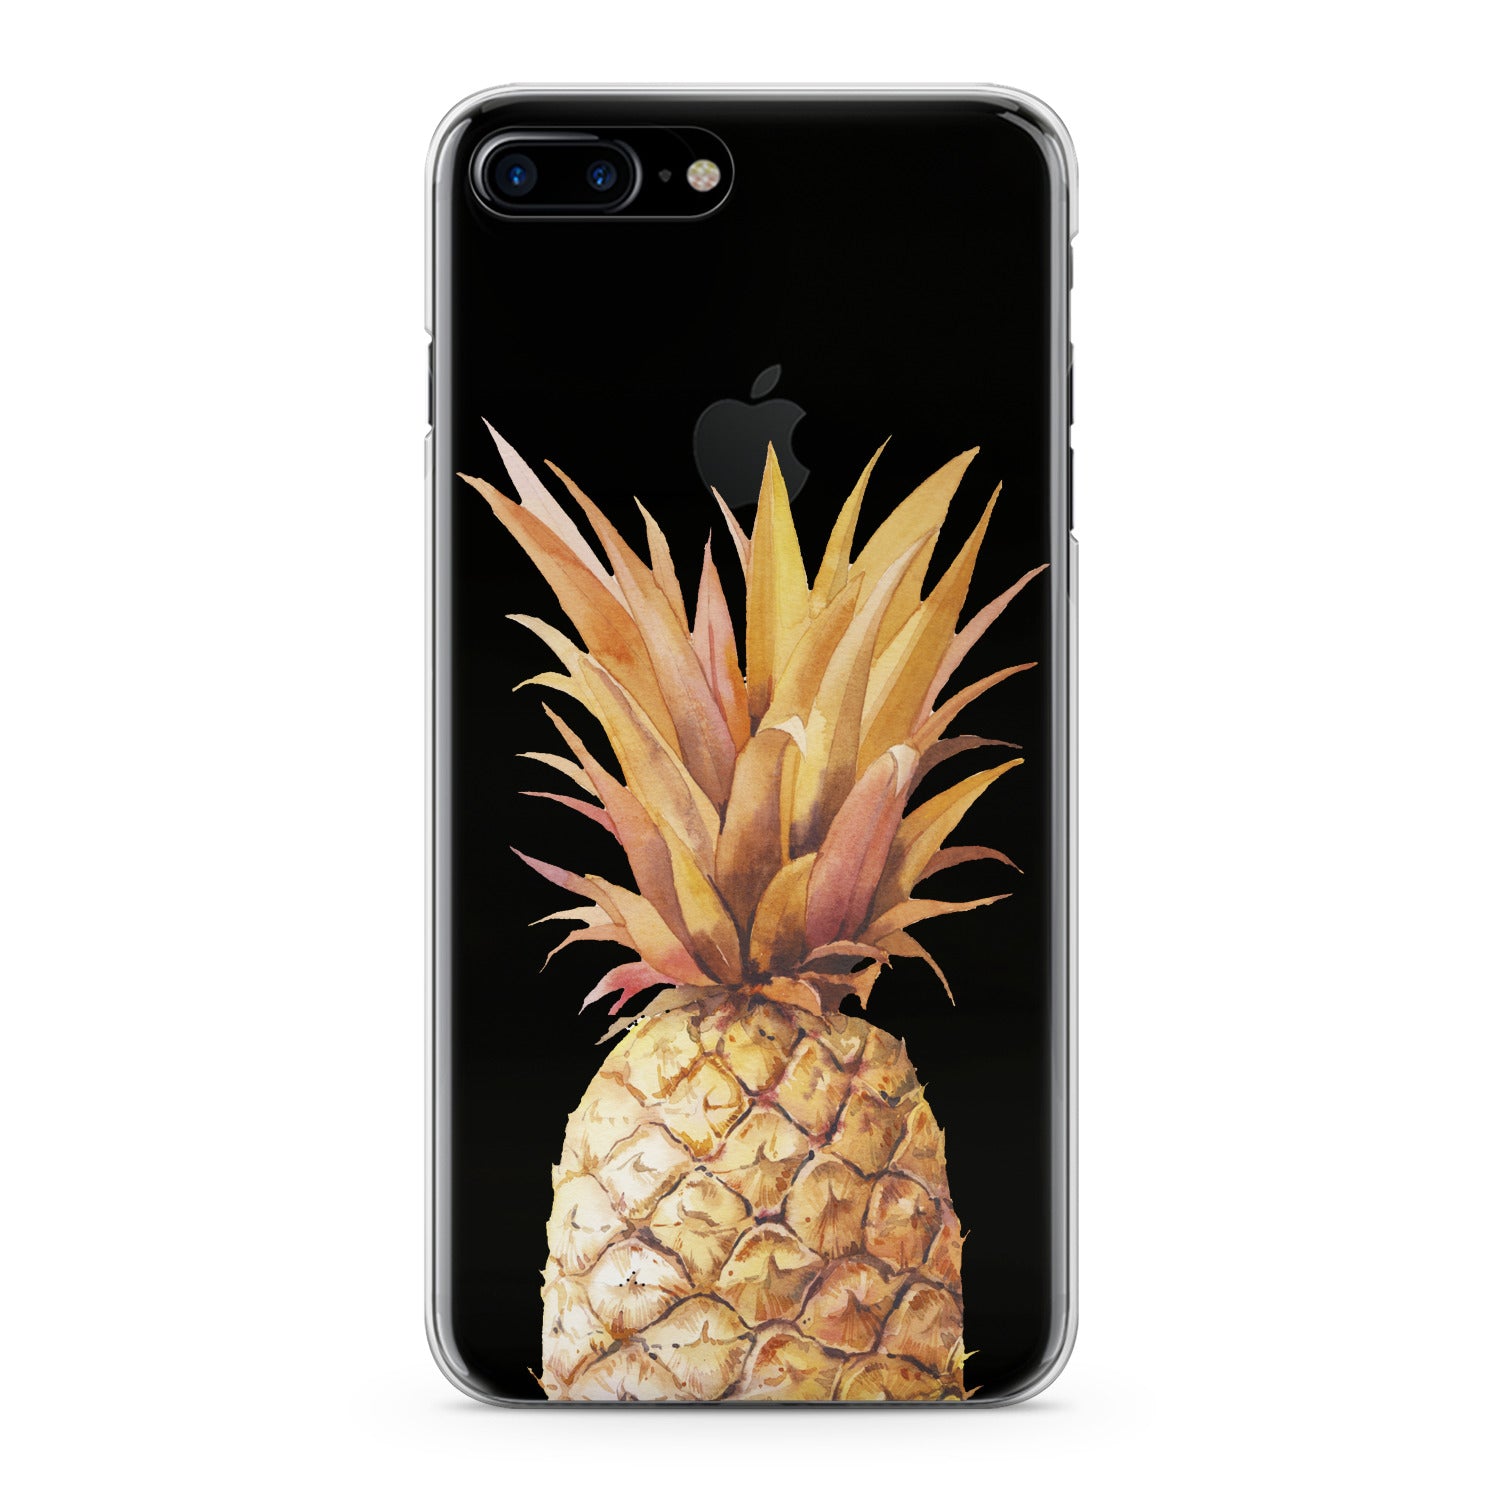 Lex Altern Pineapple Print Phone Case for your iPhone & Android phone.